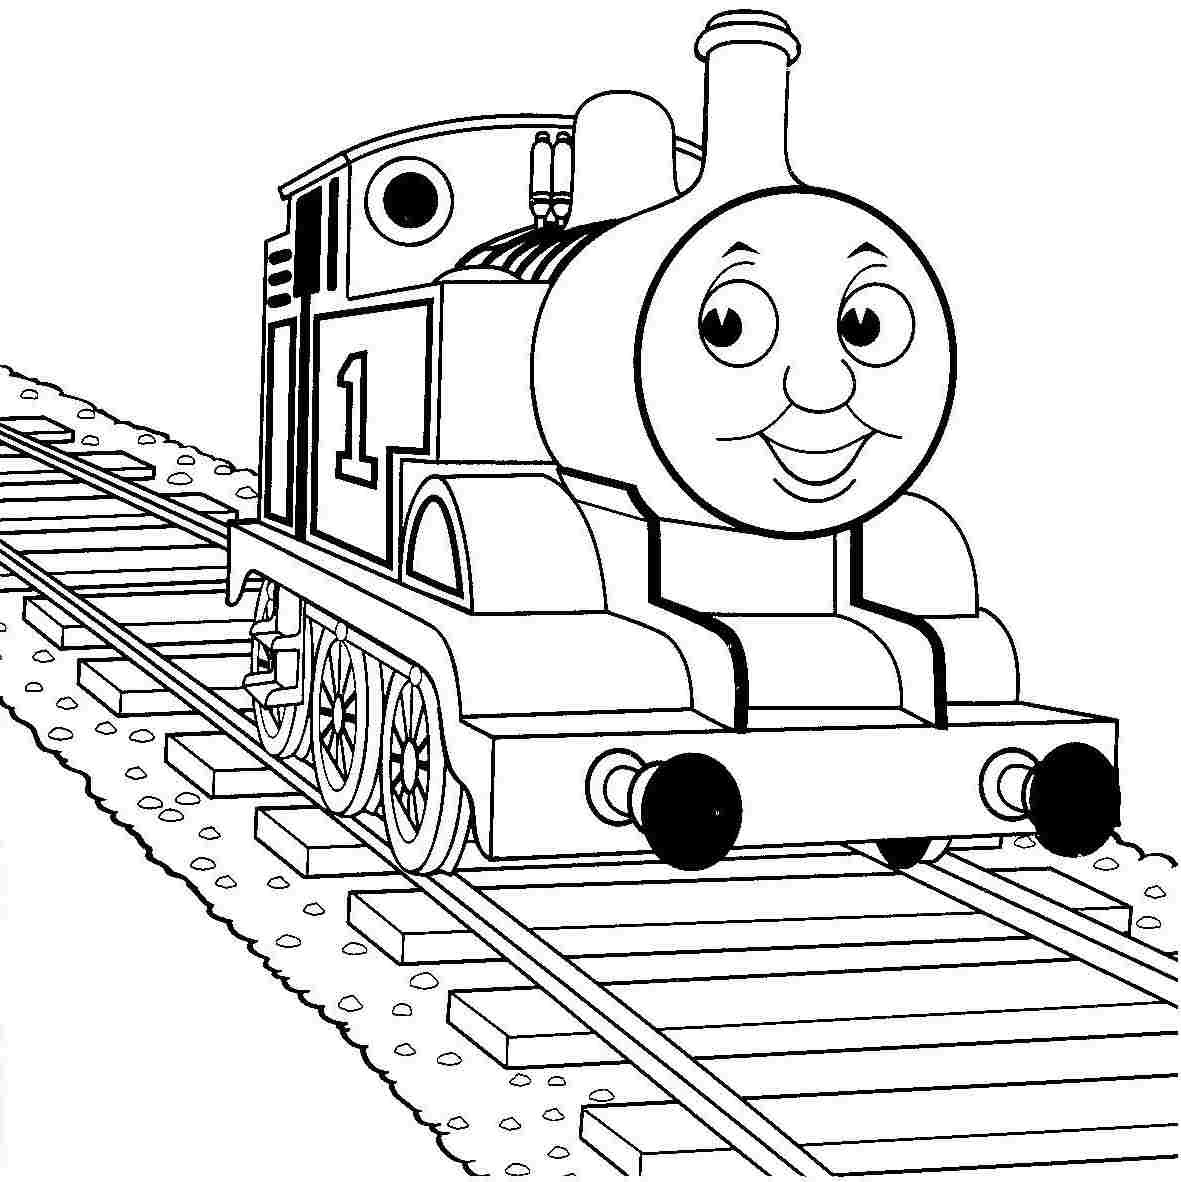 Thomas The Train Printable Coloring Pages
 13 printable thomas the train coloring pages Print Color